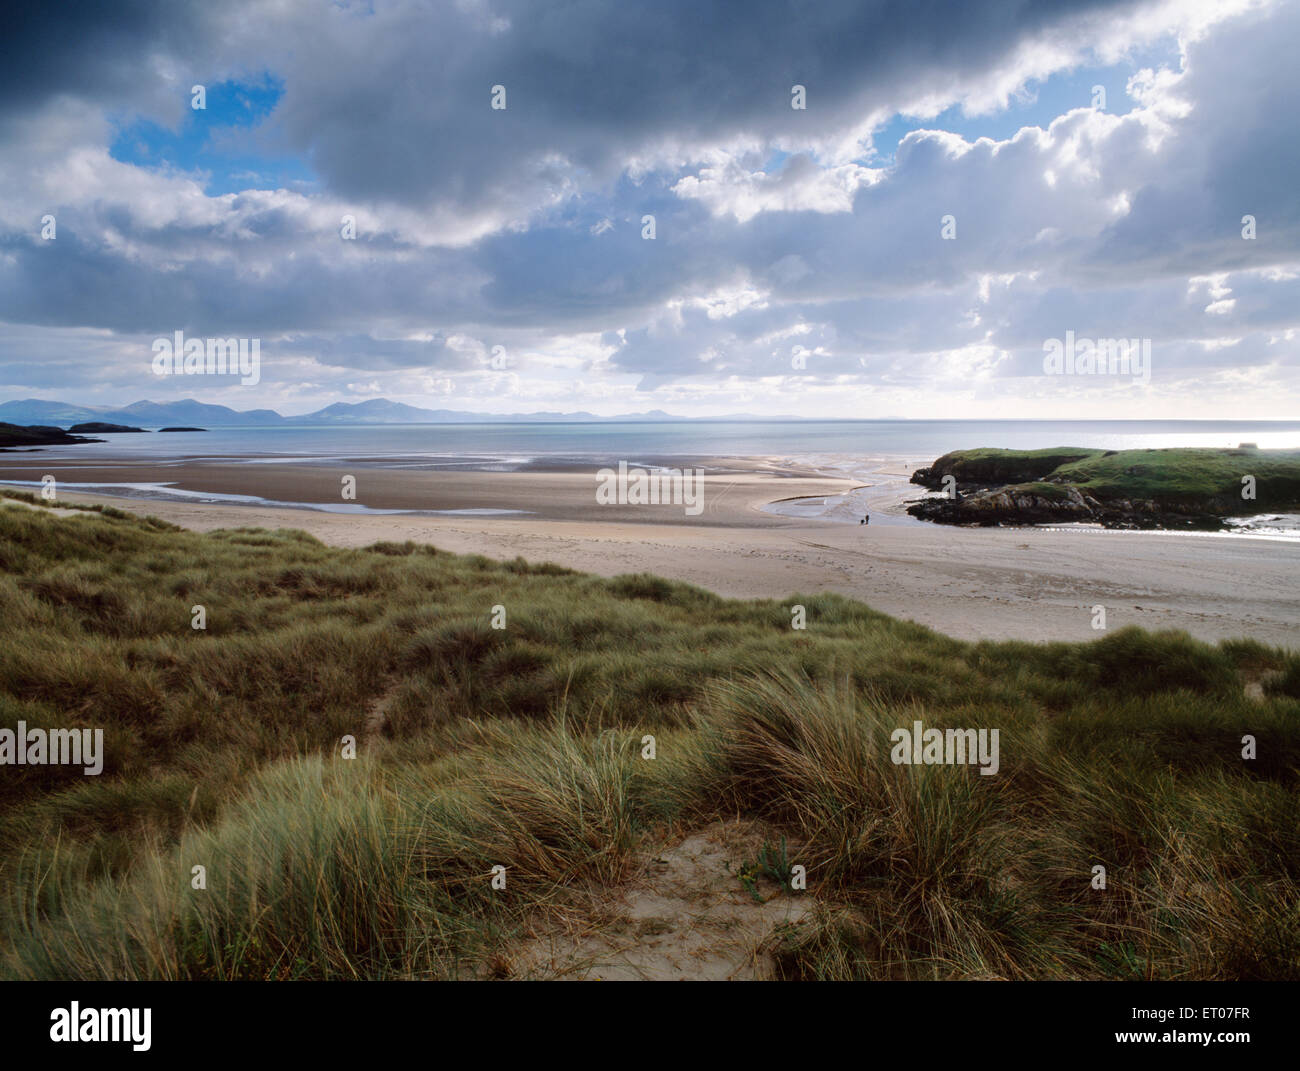 Looking SSW from Aberffraw dunes, Anglesey, at two small figures on Traeth Mawr beach with Trwyn Du headland cutting across the Ffraw estuary. Stock Photo